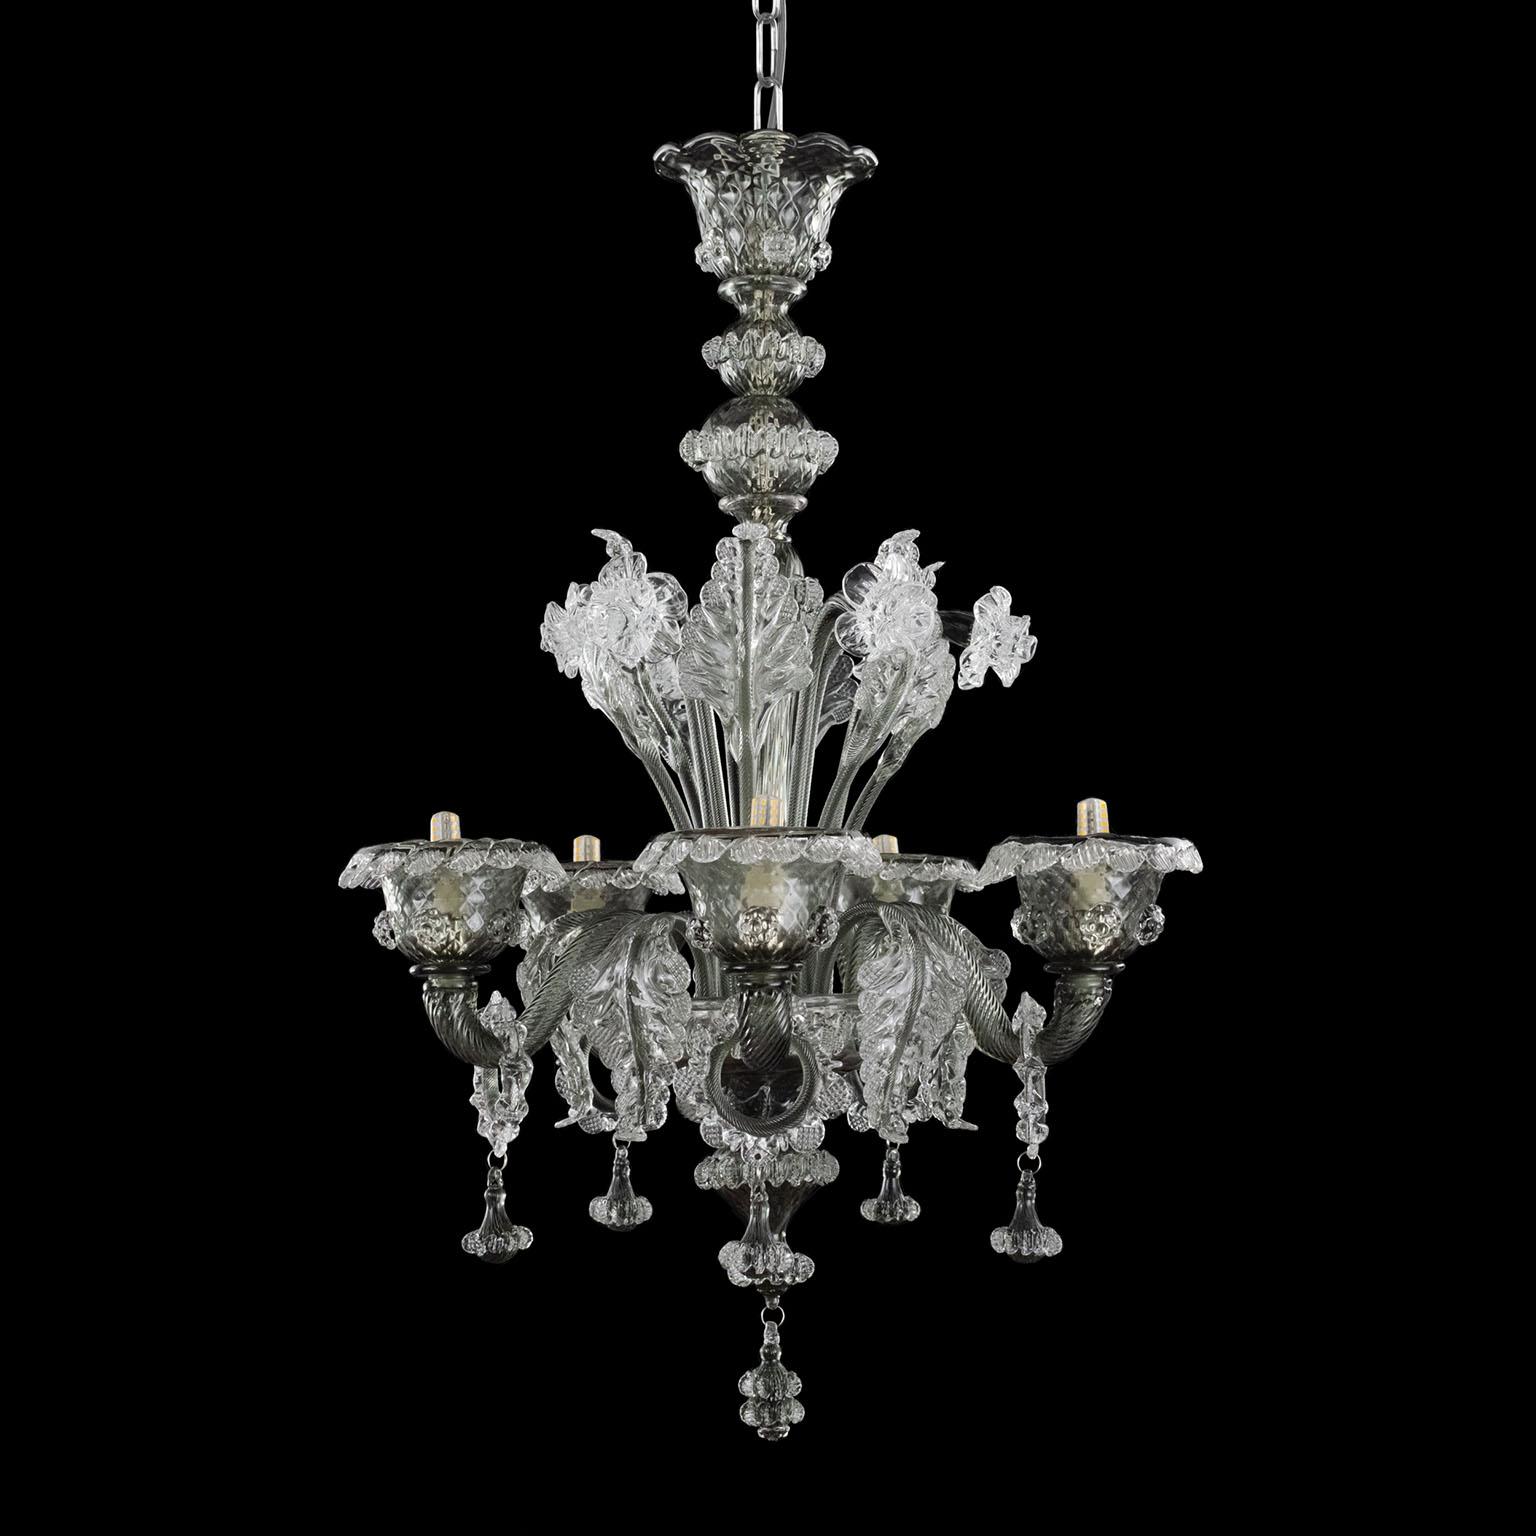 Galliano chandelier, 5-light, clear and drak grey Murano glass by Multiforme.
This artistic glass chandelier has 6-light, is handmade in crystal and dark grey Muarno glass.
Galliano is our tribute to the authentic Murano glass tradition. It requires